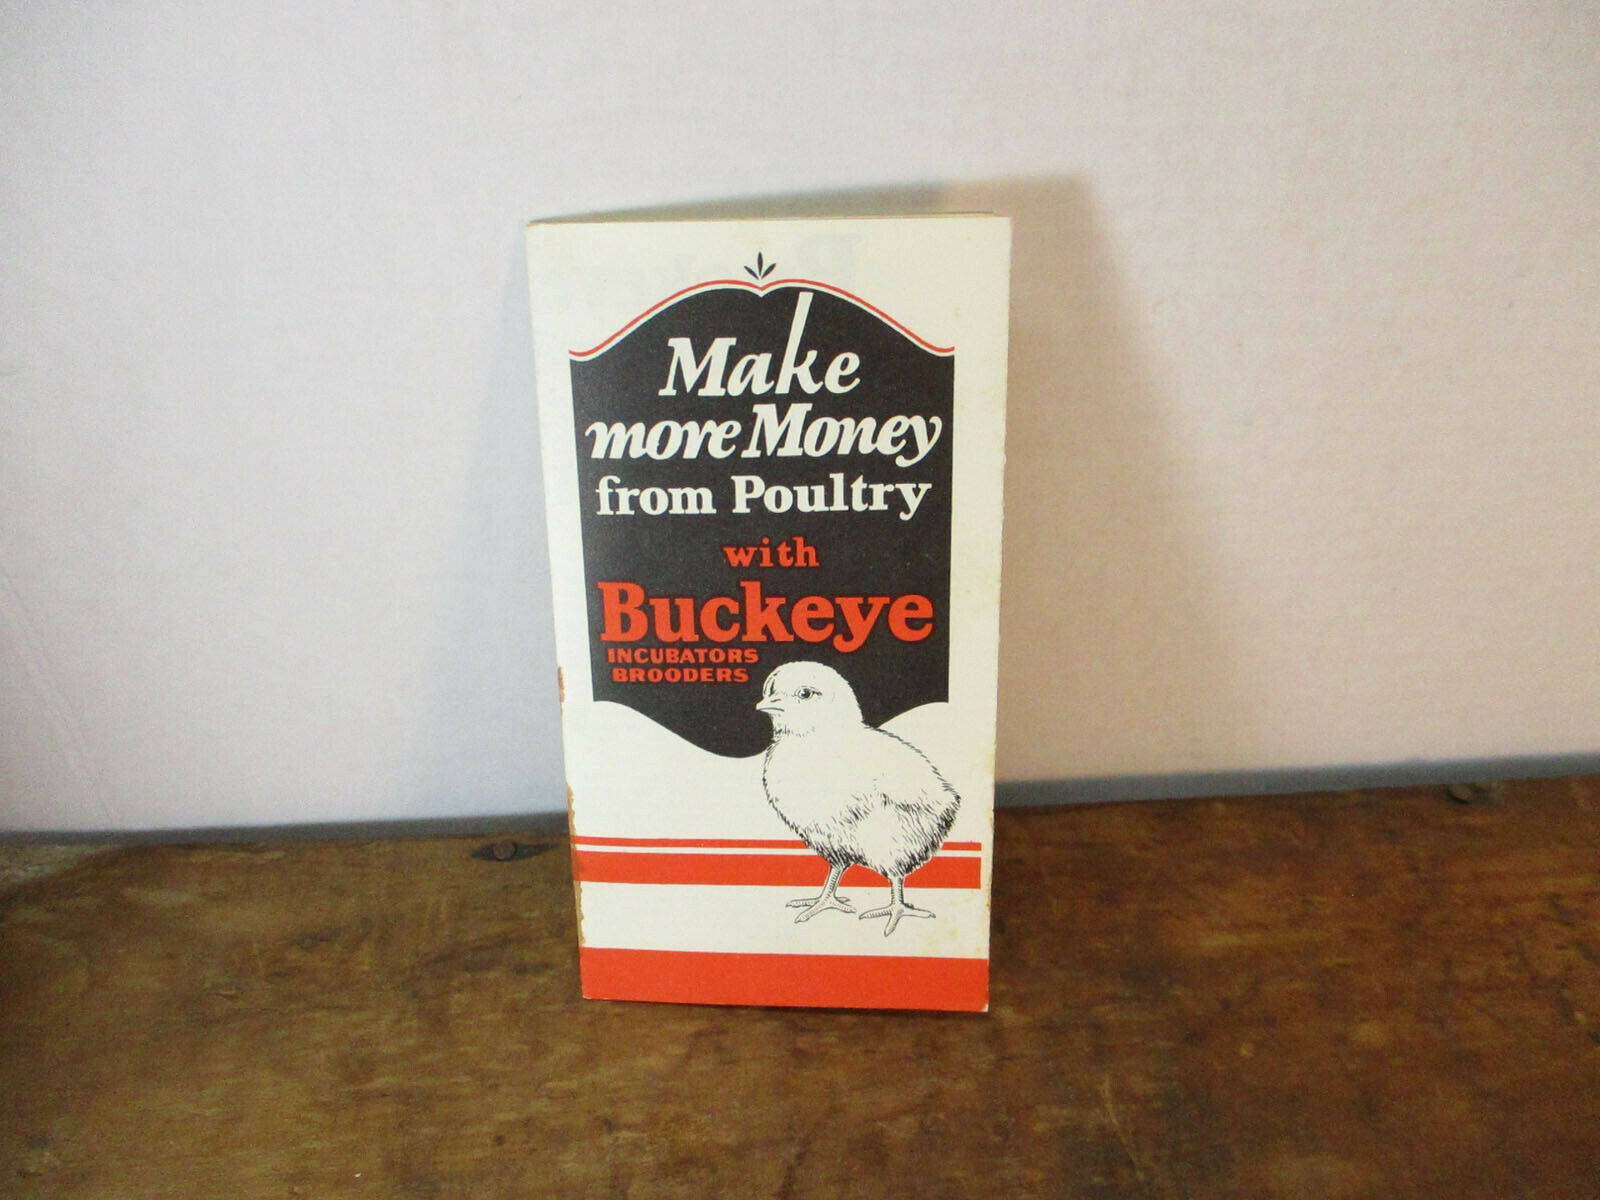 Make More Money From Poultry With Buckeye Incubators Brodders